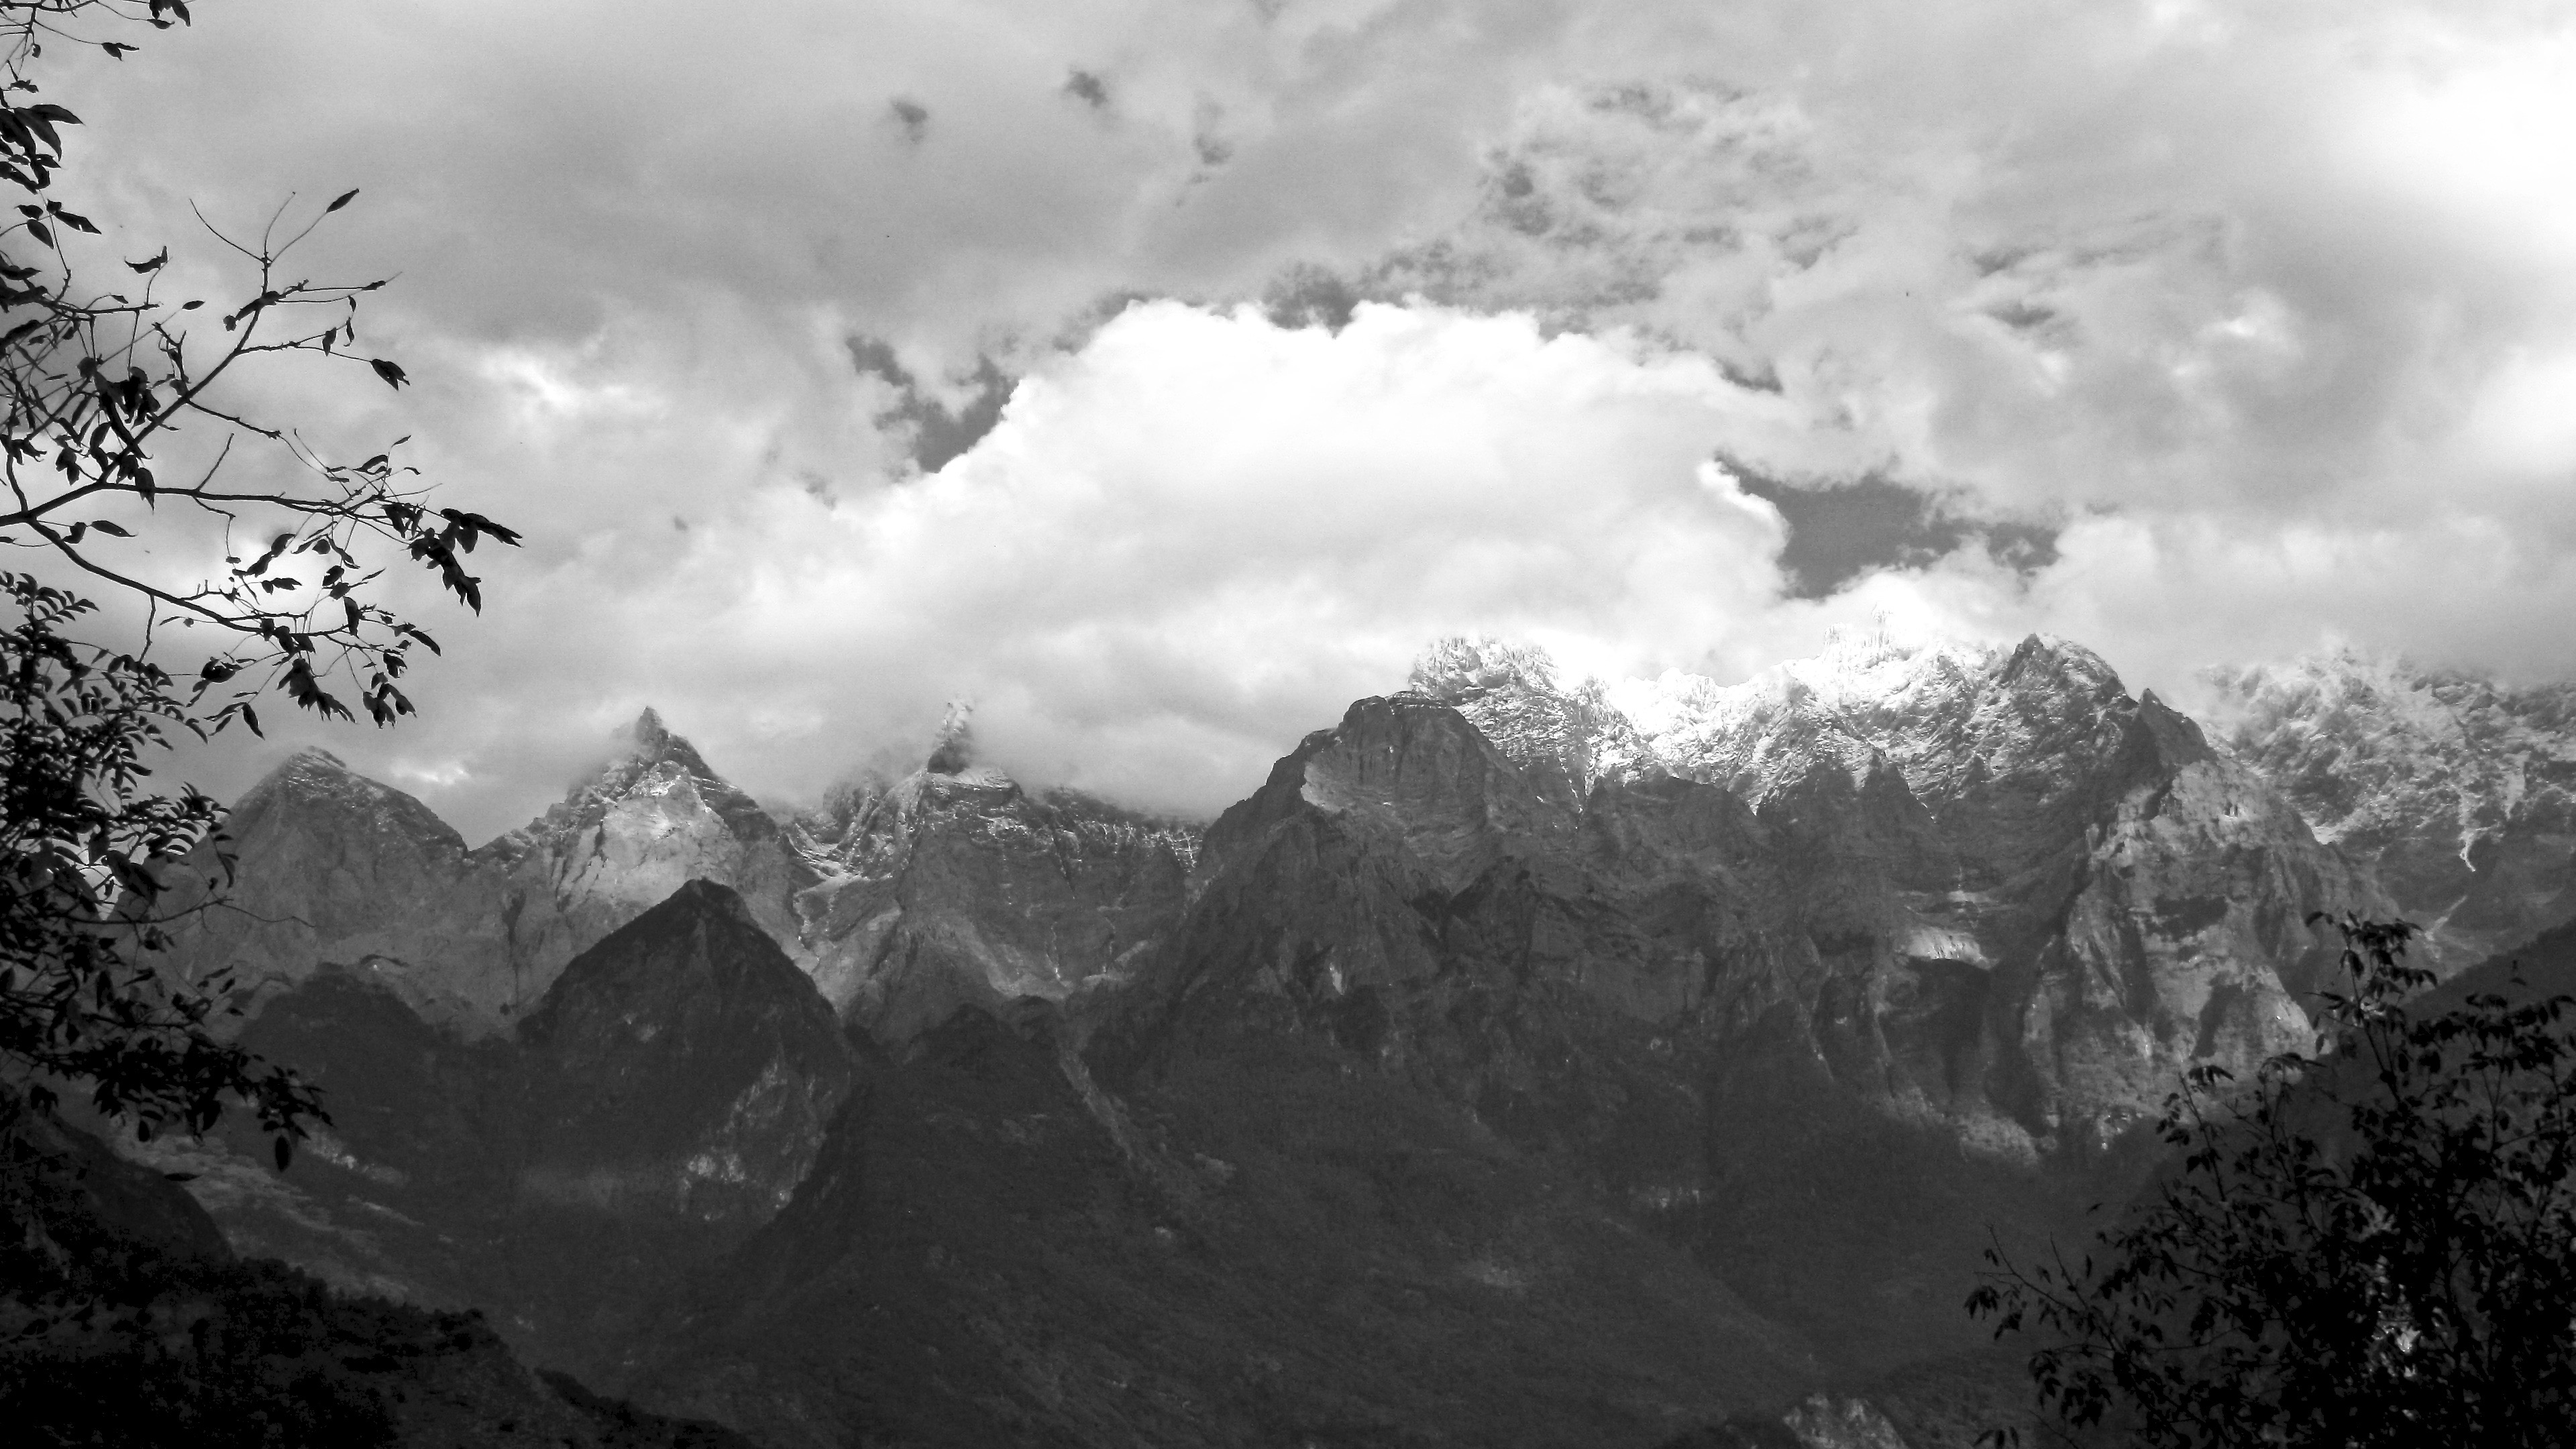 Tiger Leaping Gorge 16